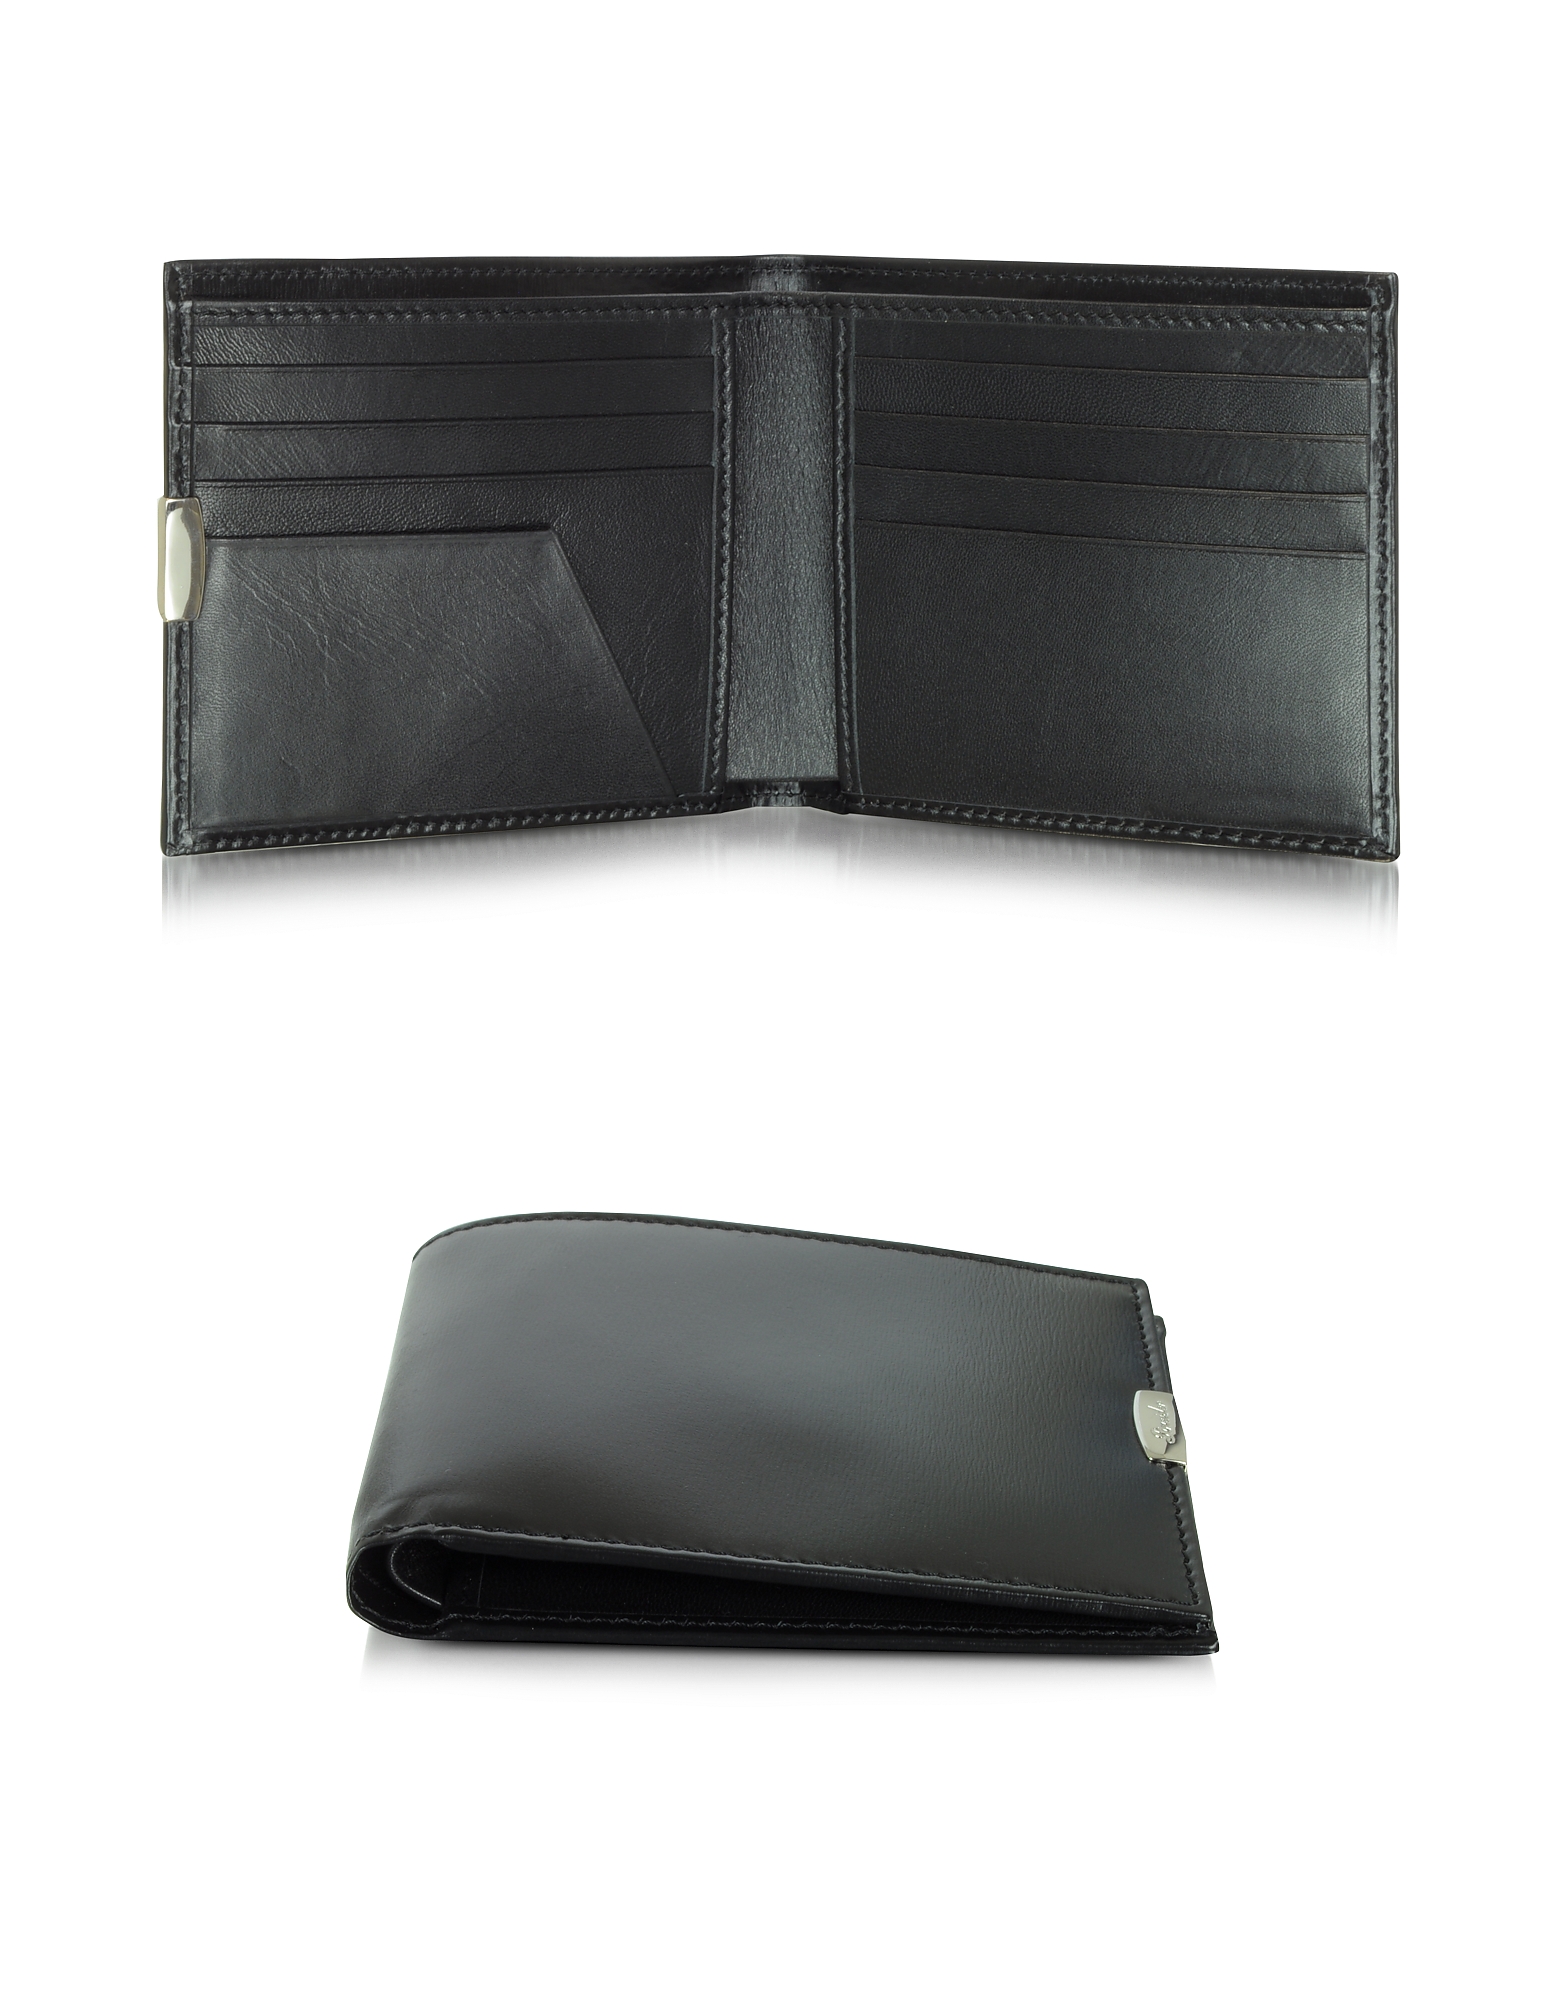 

1949 Small Black Leather Men's Wallet